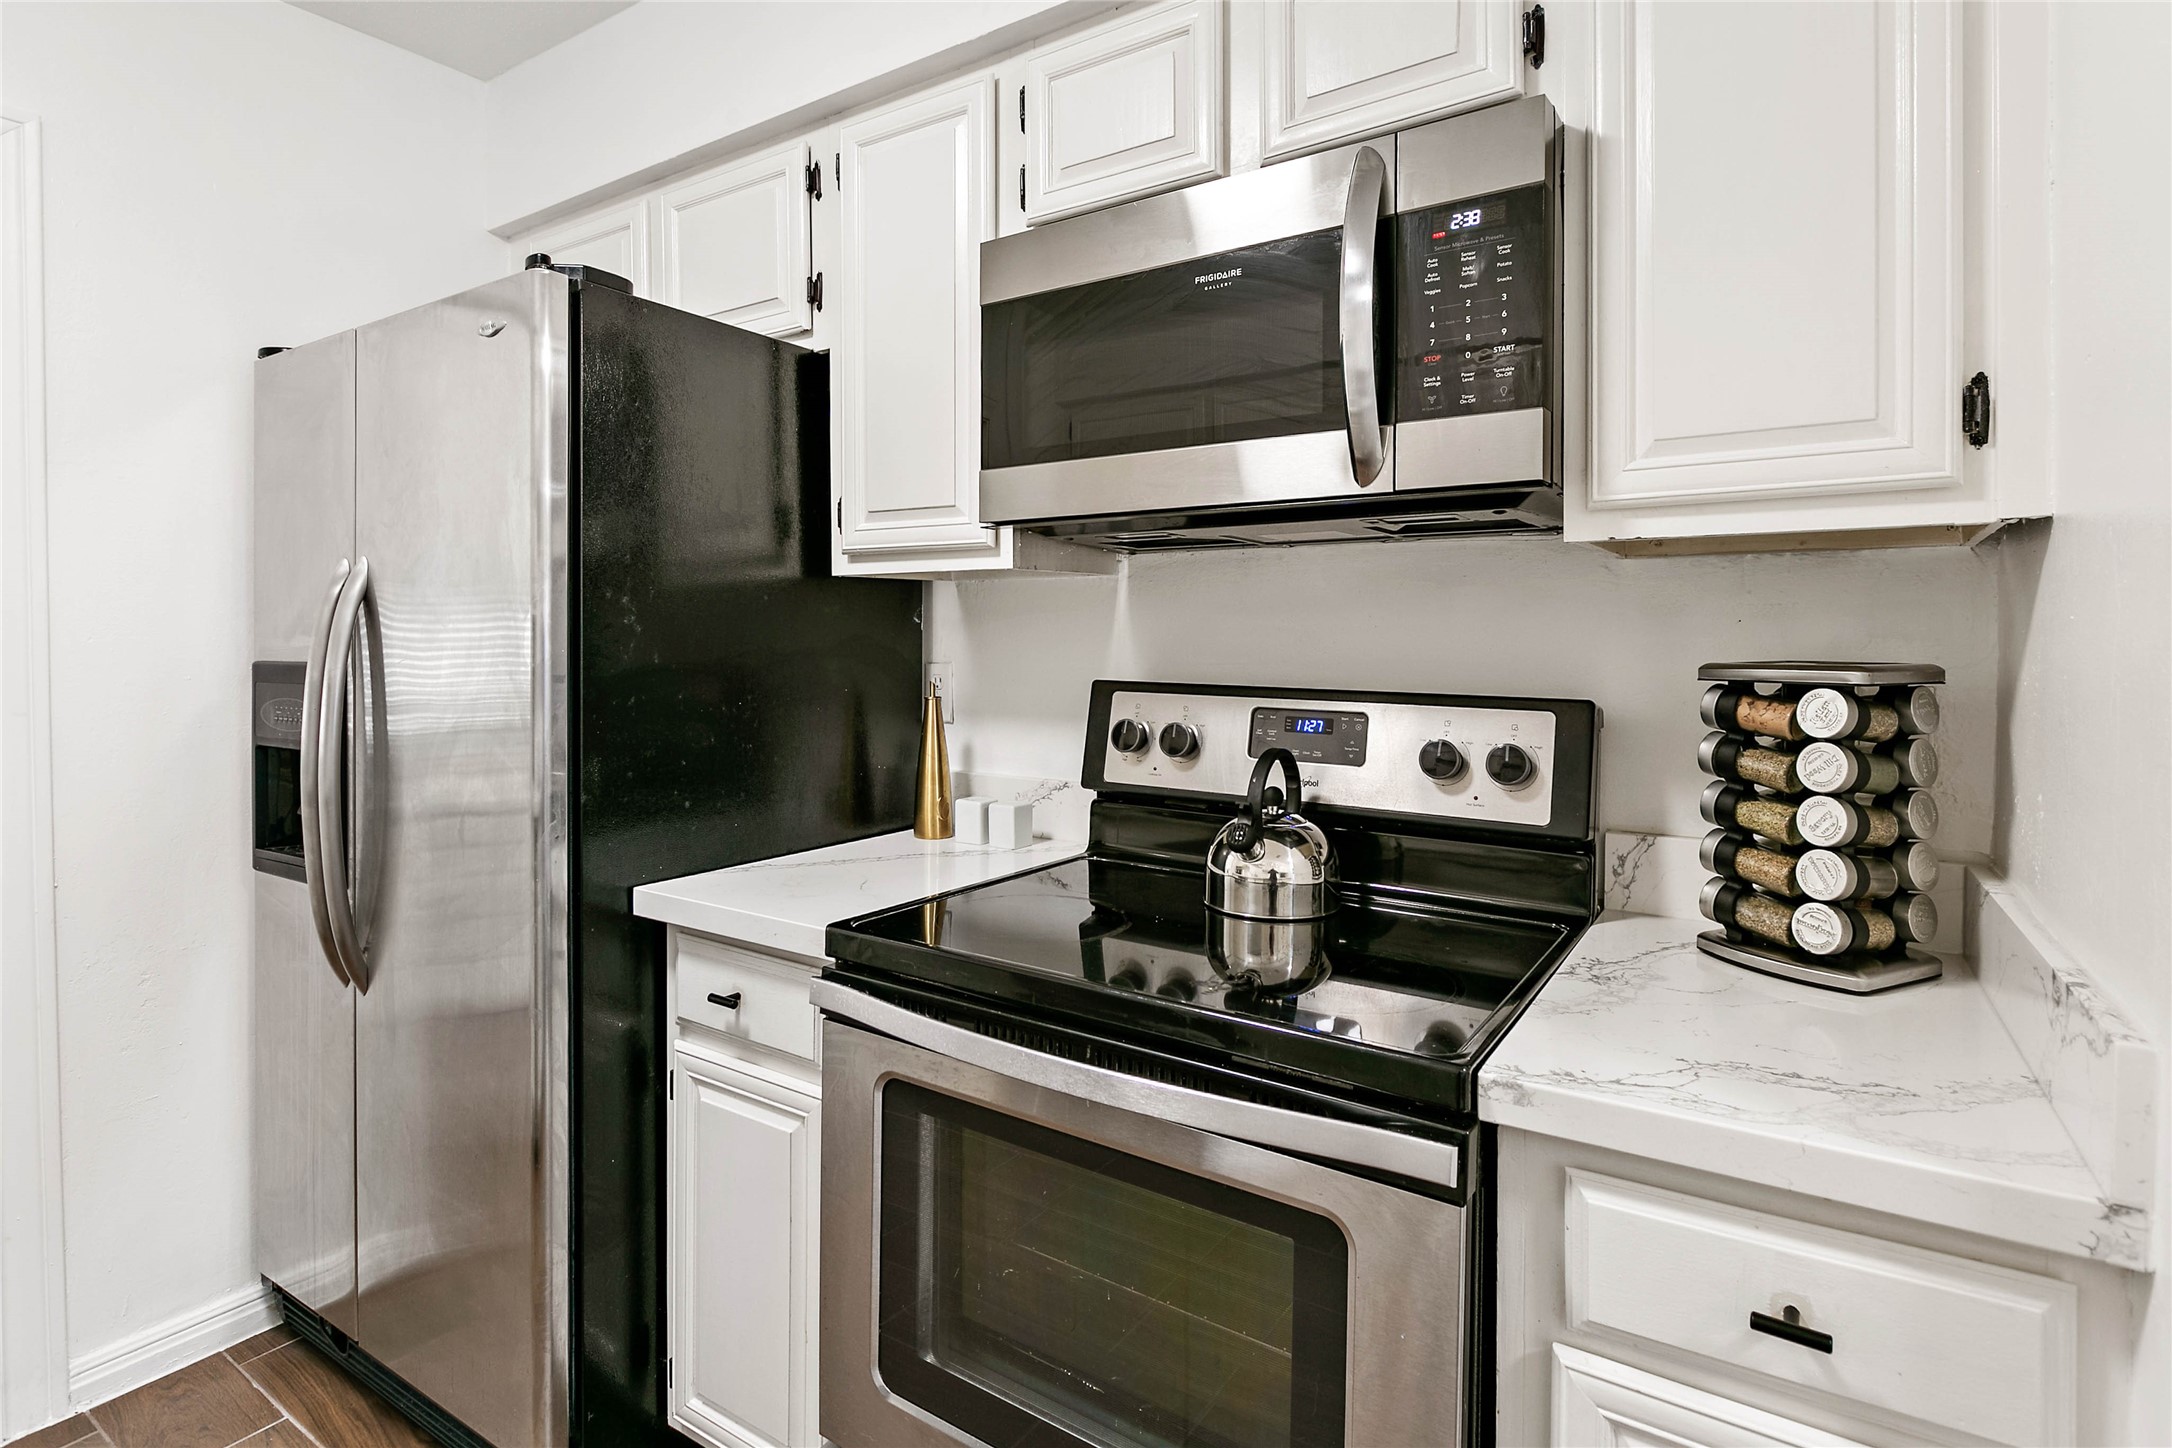 Enjoy the clean look of stainless steel appliances.